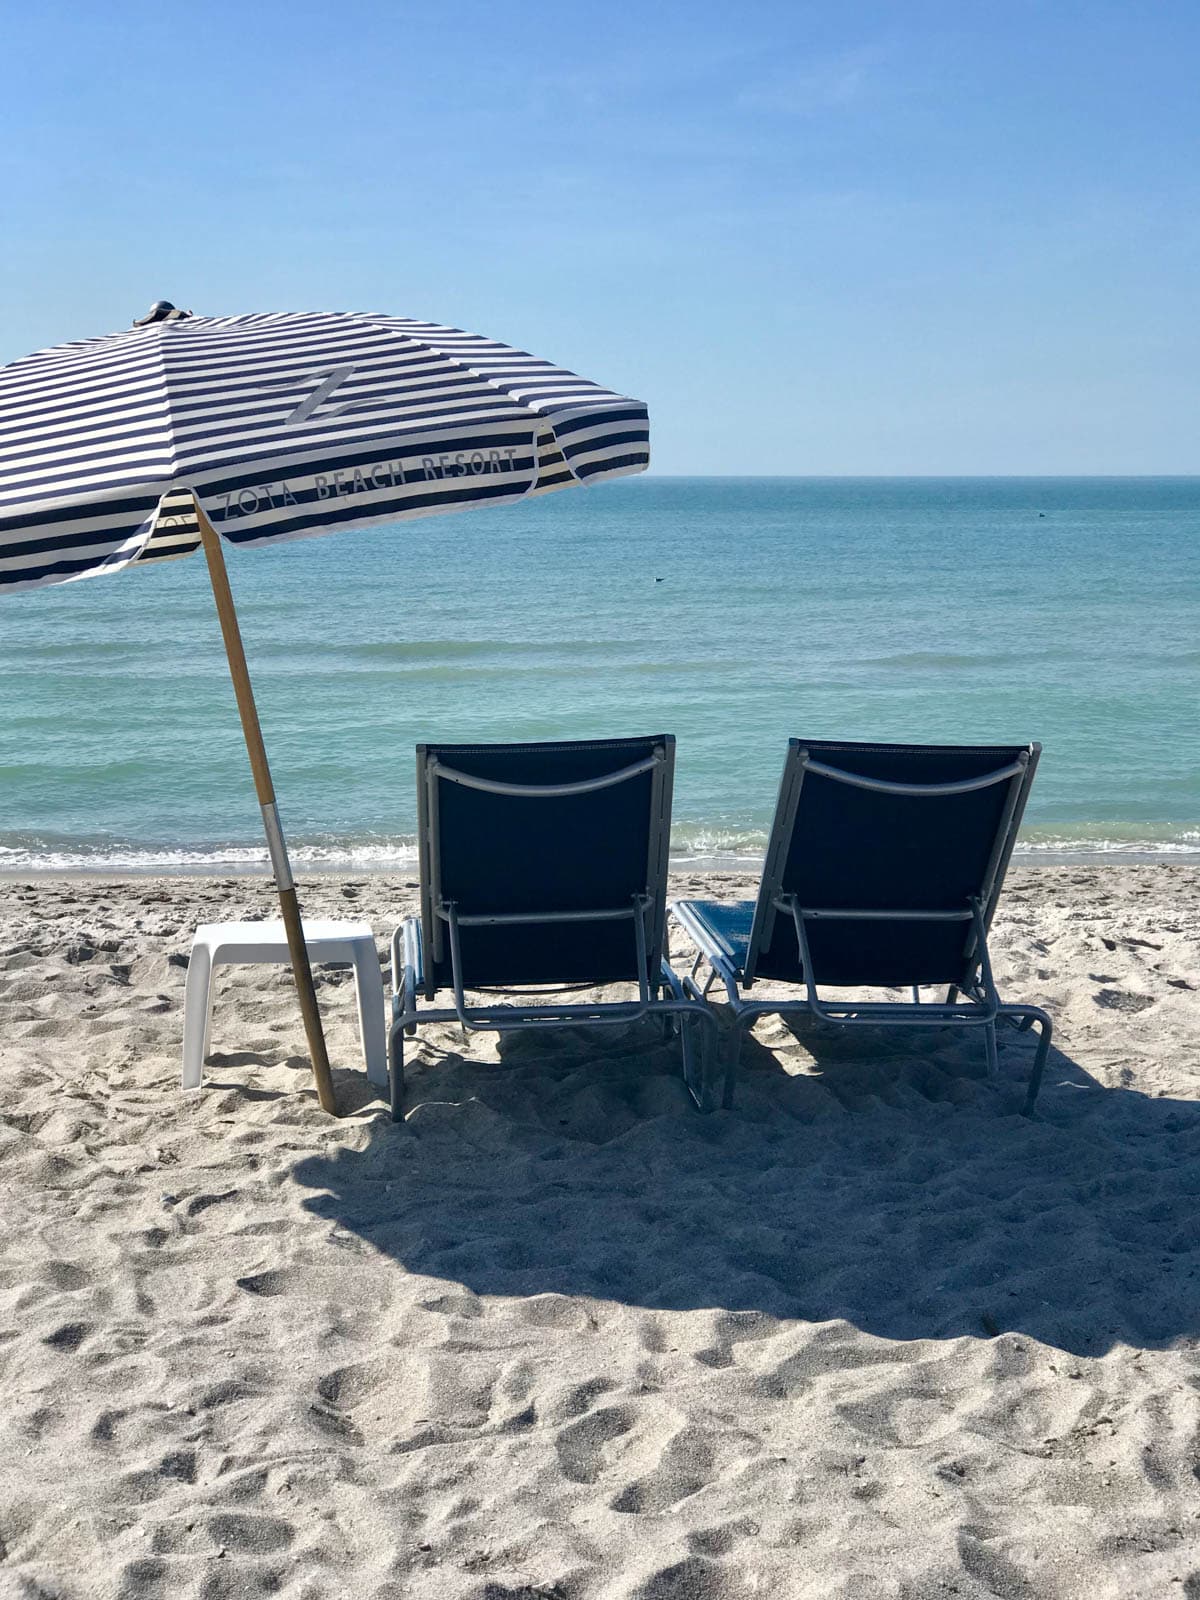 Chairs and an umbrella on the beach.